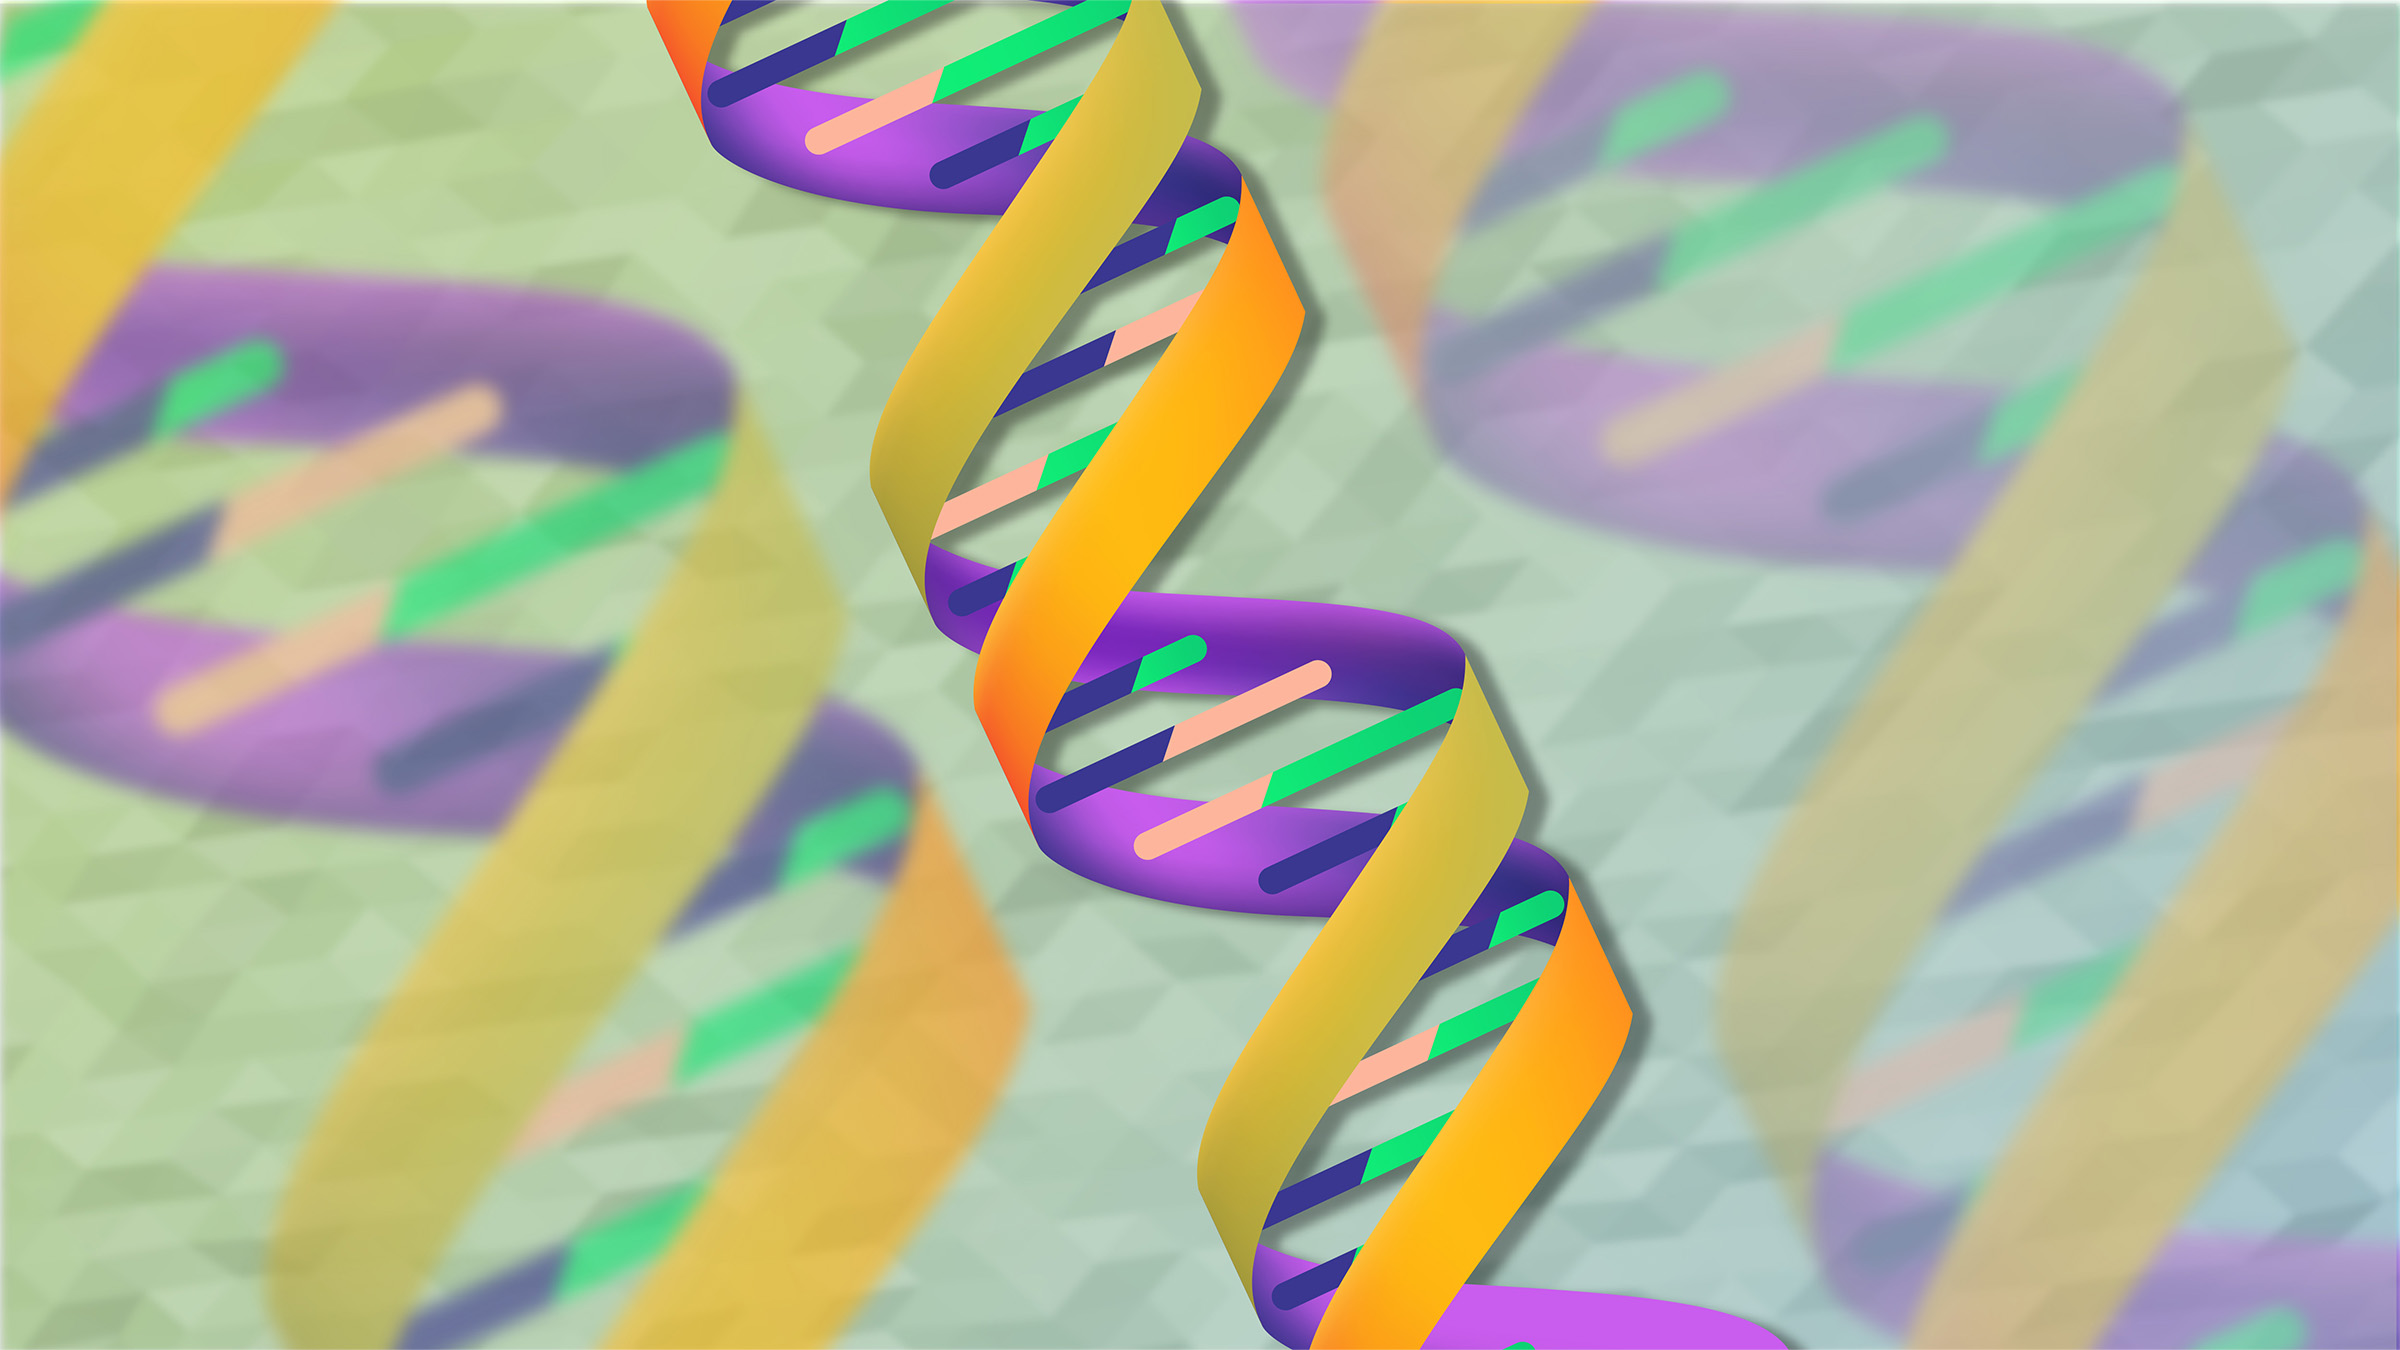 Illustration of a DNA helix in different colors